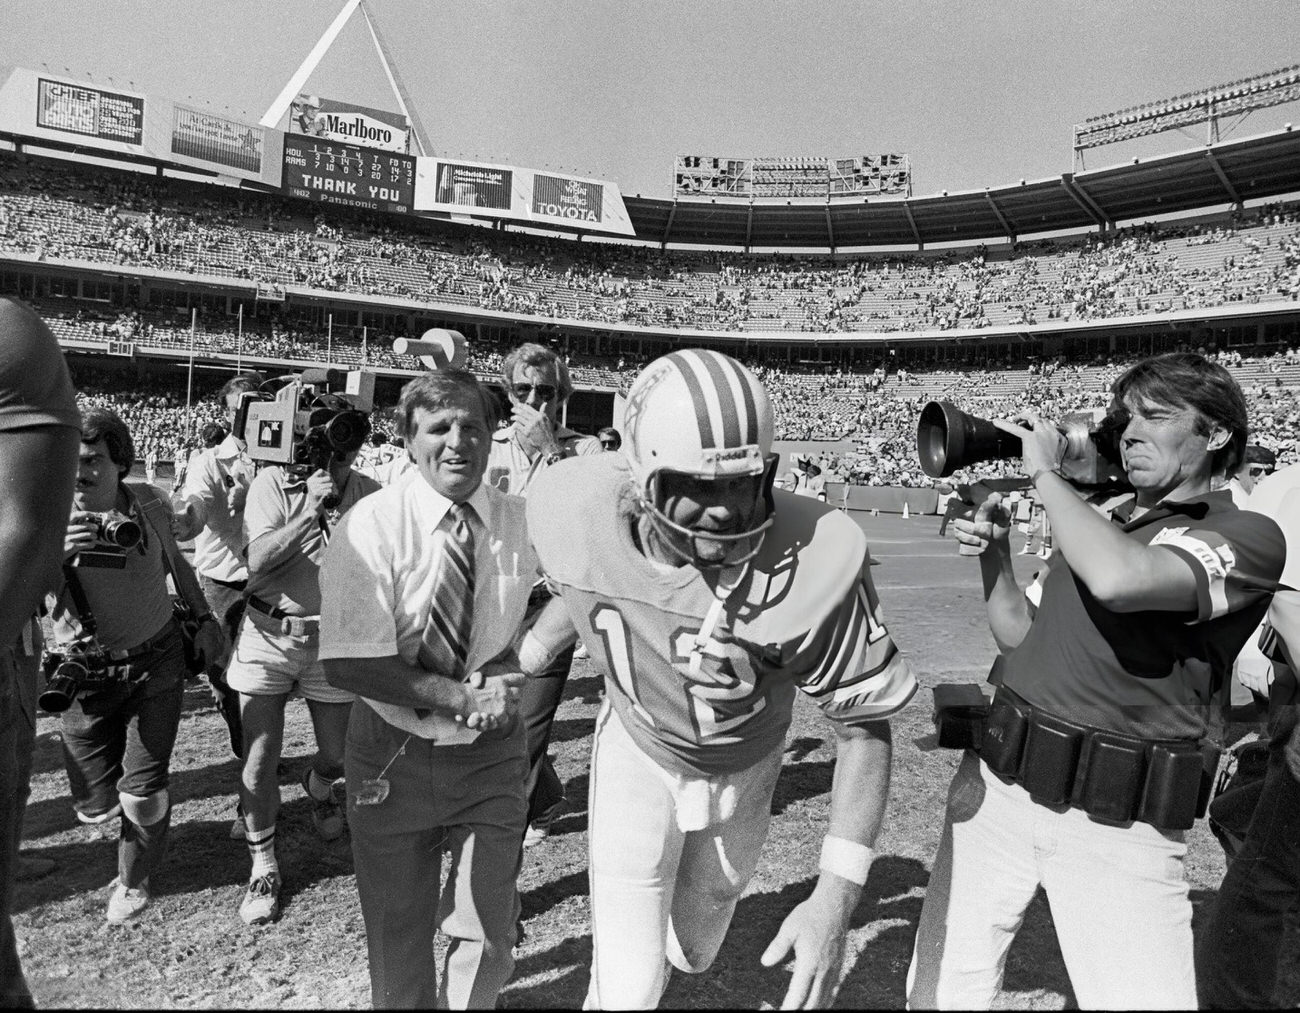 Houston Oilers quarterback Ken Stabler leaves the field after defeating the LA Rams, Anaheim, California, 1981.